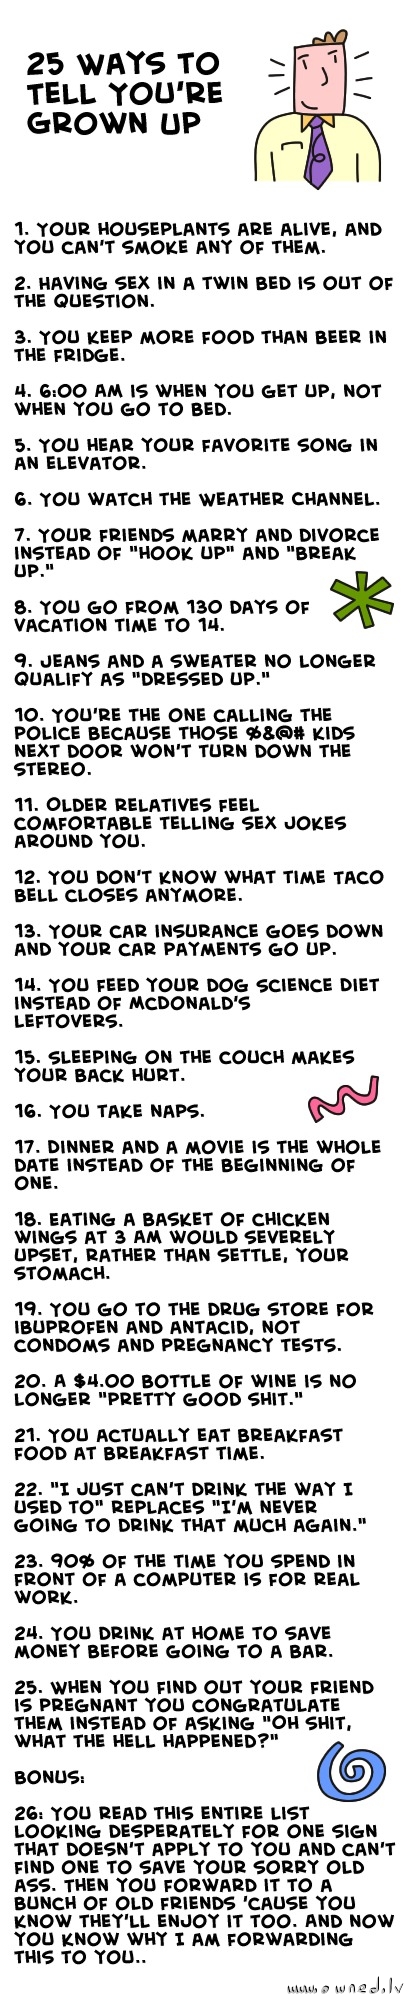 25 ways to tell you are grown up